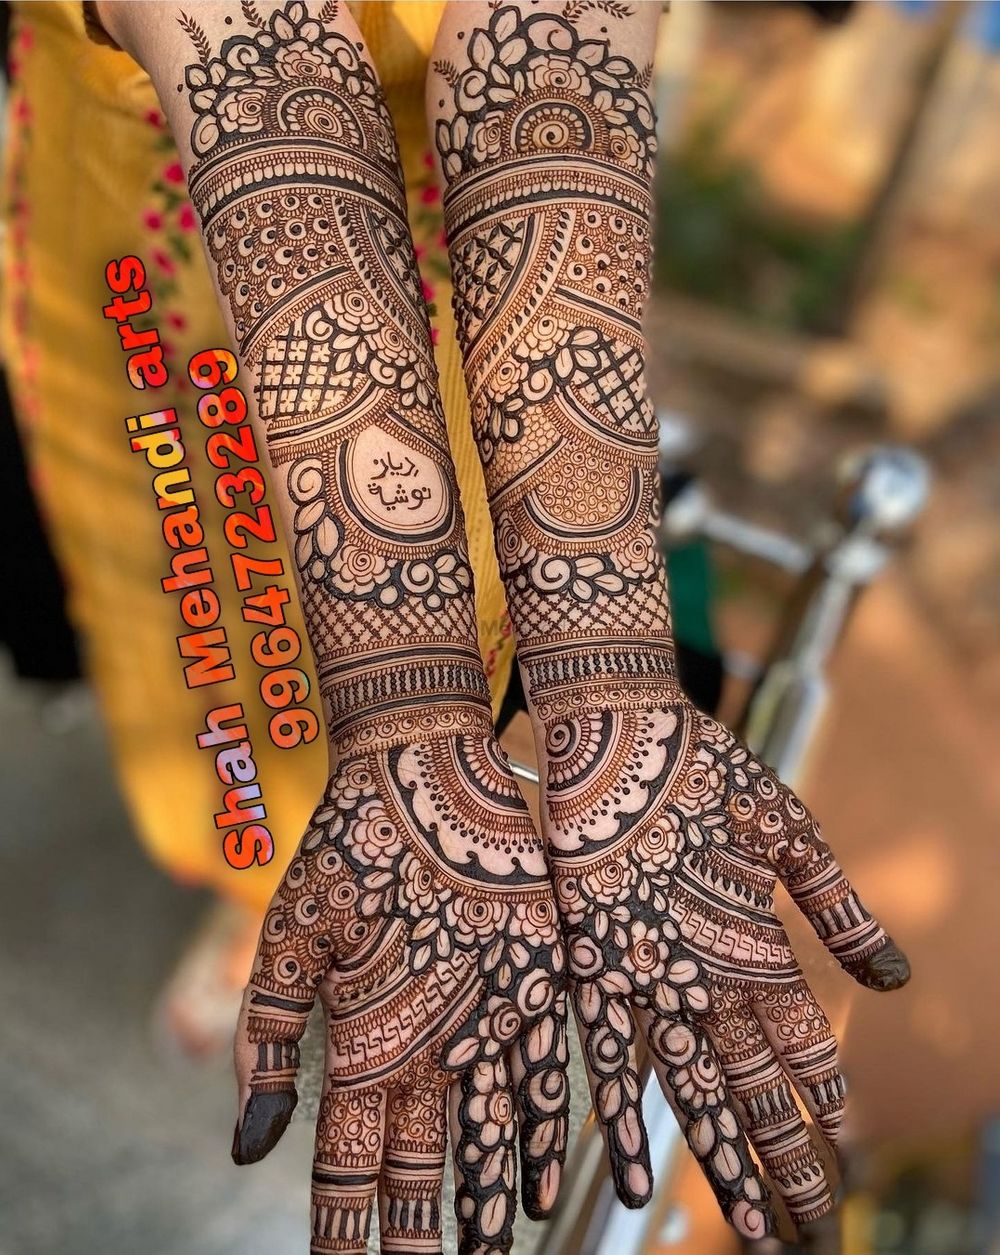 Photo From BEST OF BRIDAL MEHANDI SPECIALIST - By Shah Mehandi Arts